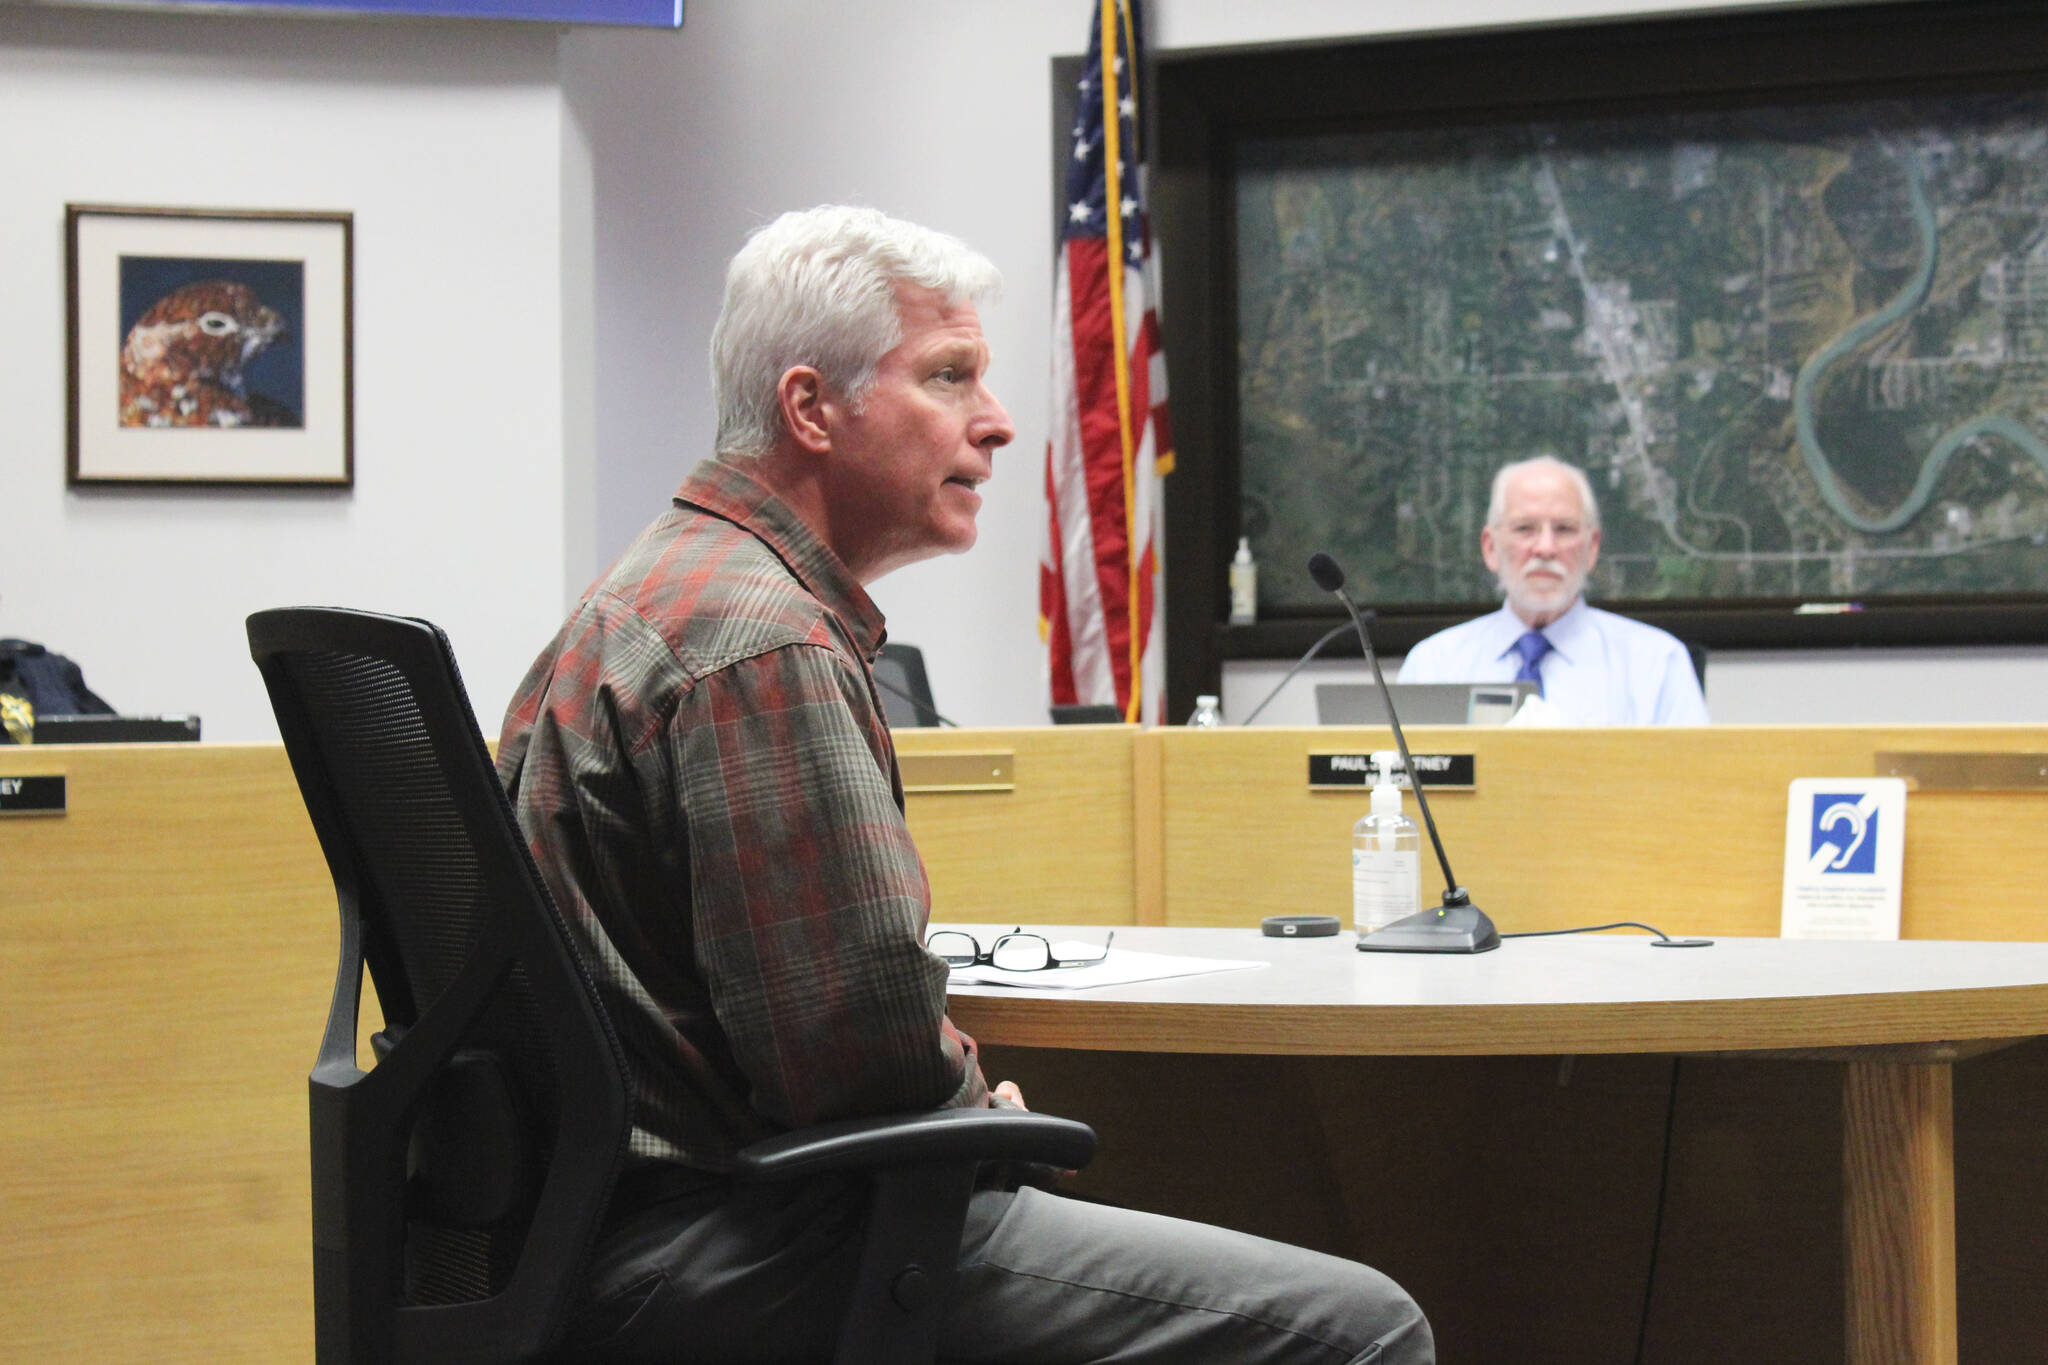 Soldotna Director of Economic Development and Planning John Czarnezki describes a plan for more parking in downtown Soldotna during a meeting of the Soldotna City Council on Wednesday, March 9, 2022, in Soldotna, Alaska. (Ashlyn O’Hara/Peninsula Clarion)